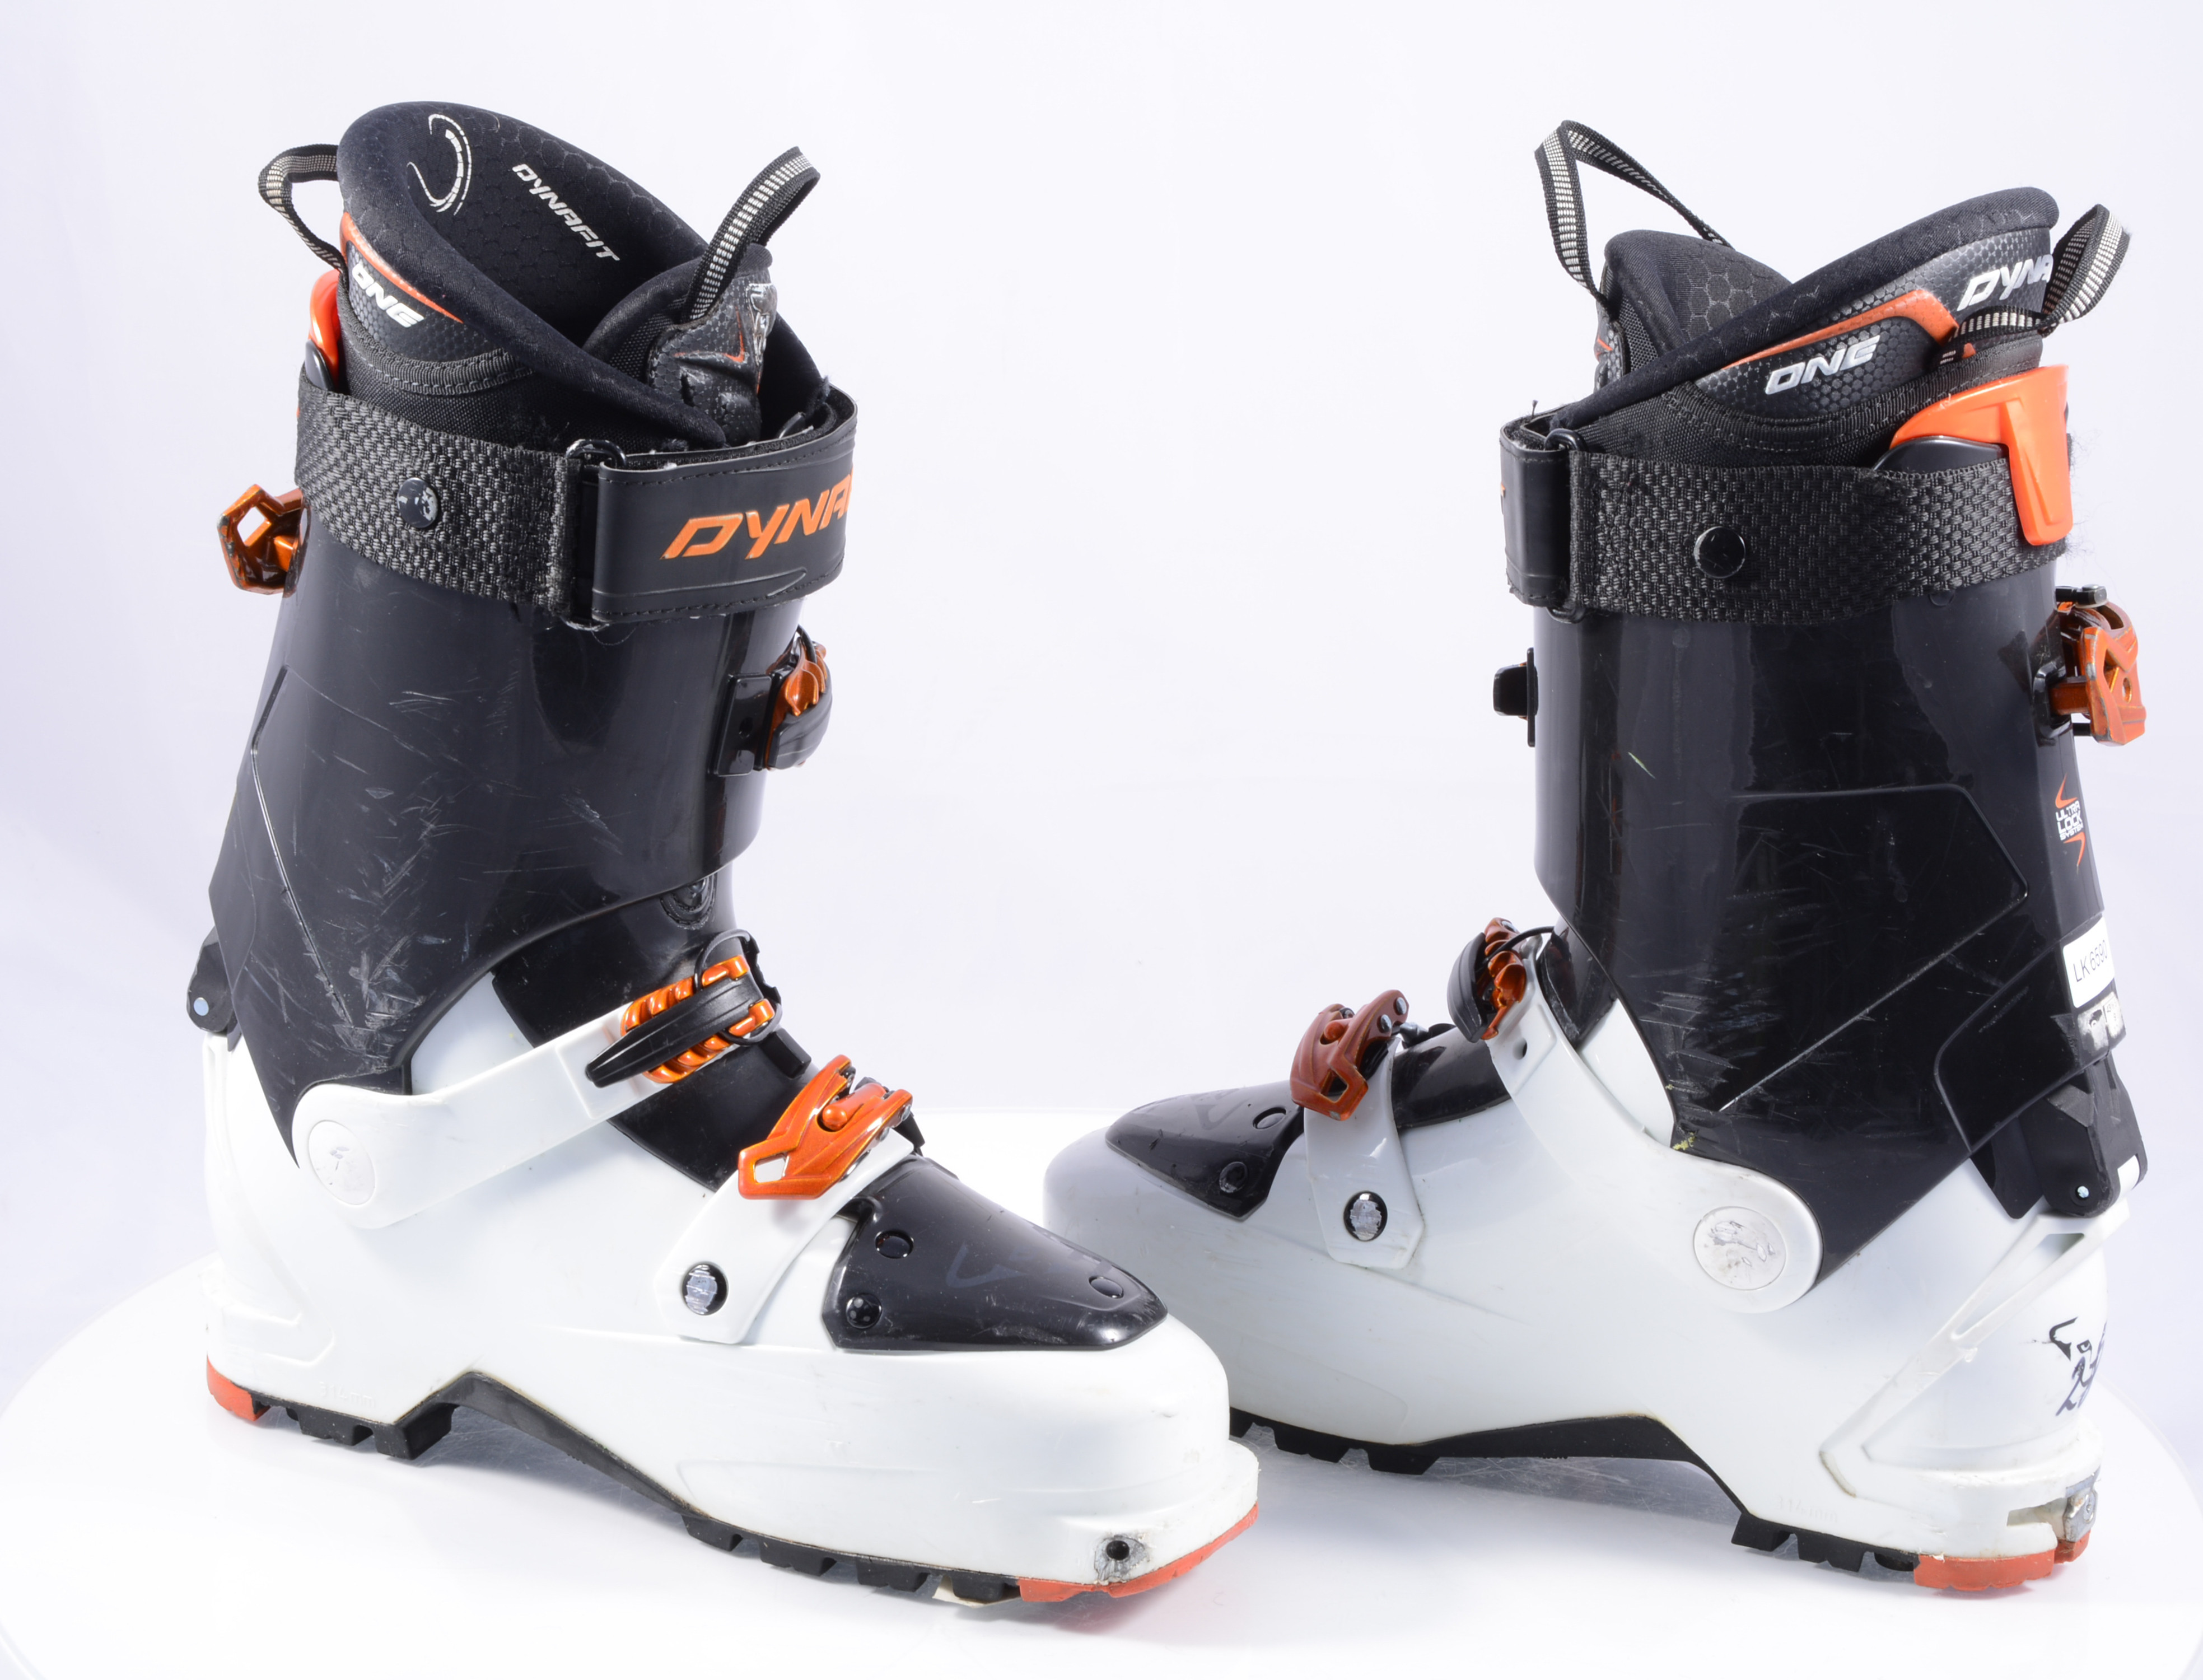 ski touring boots DYNAFIT ONE PX TF, ultra lock system 